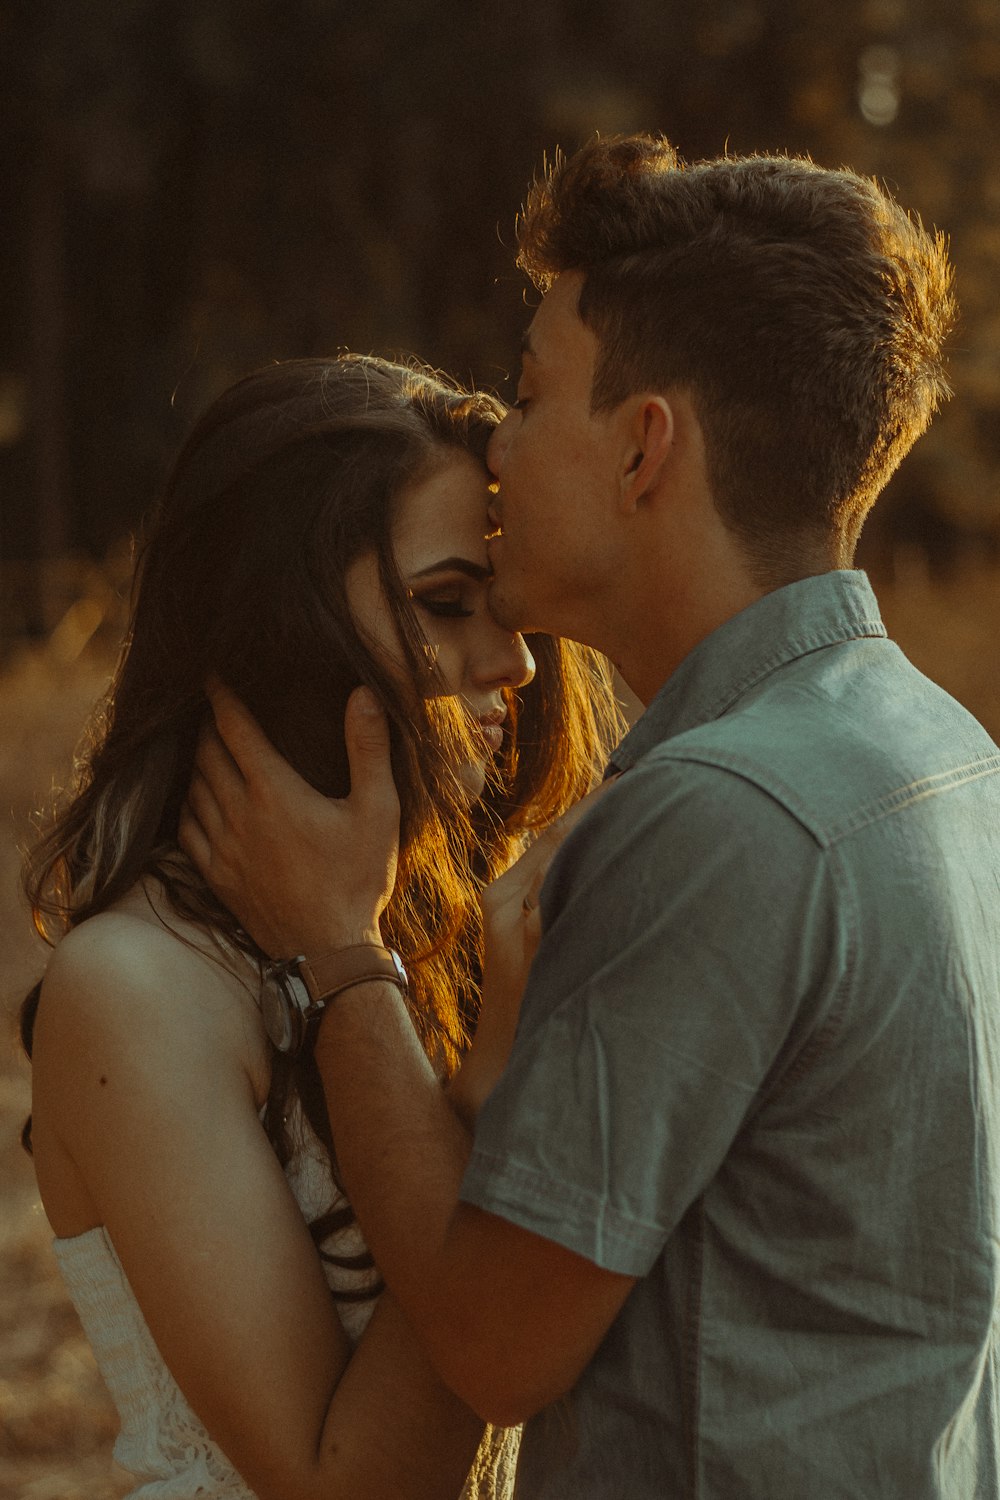 500+ Love Couple Pictures | Download Free Images on Unsplash